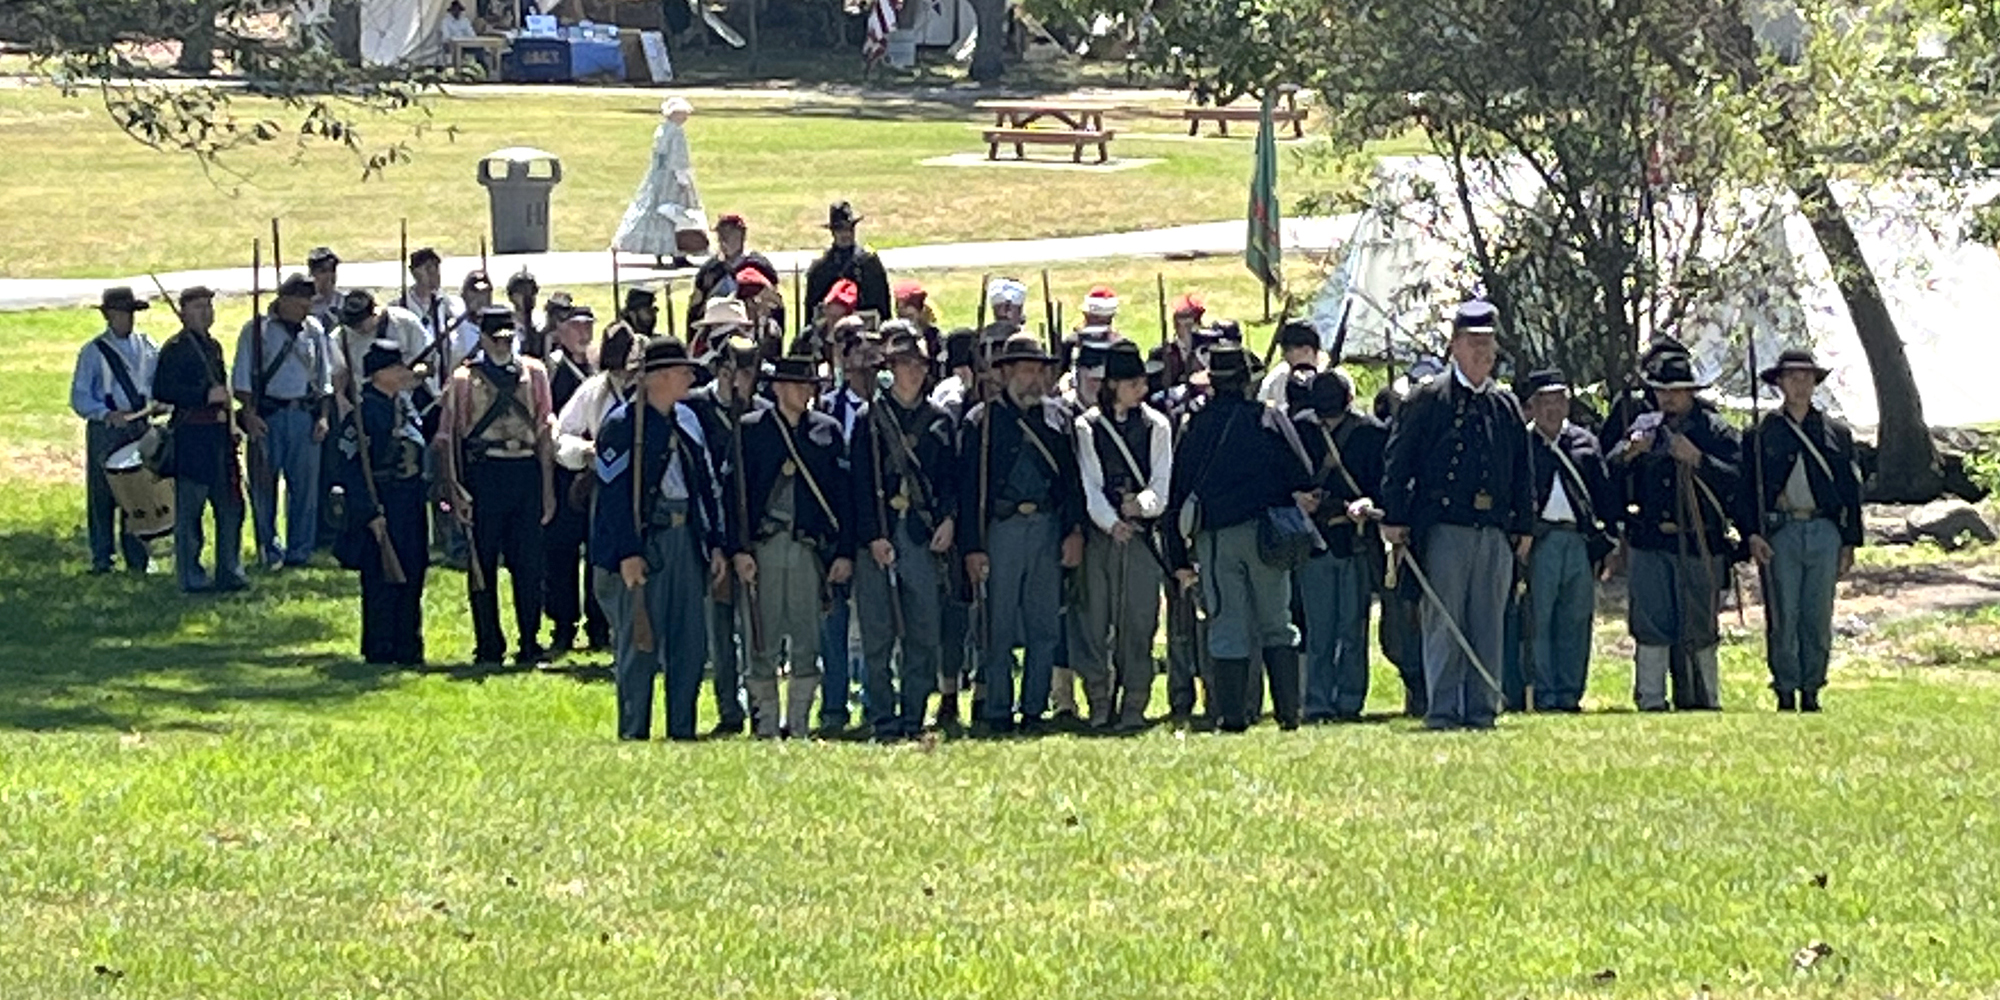 2022 09-03 49th Ohio Marching to Battle 01